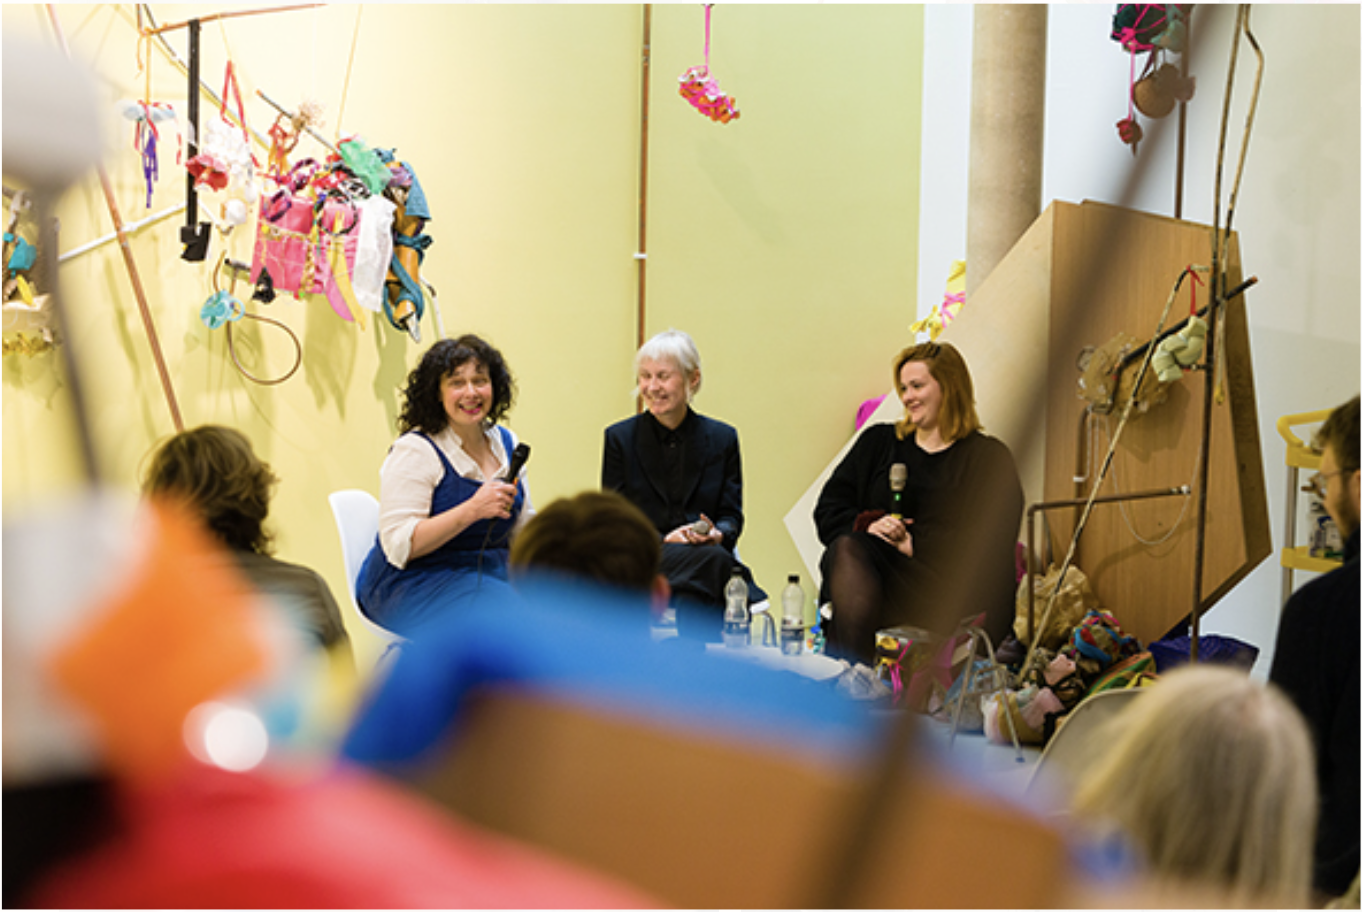 Three women sitting in a room surrounded by colourful objects and shapes.  They are speaking to a seated crowd and smiling